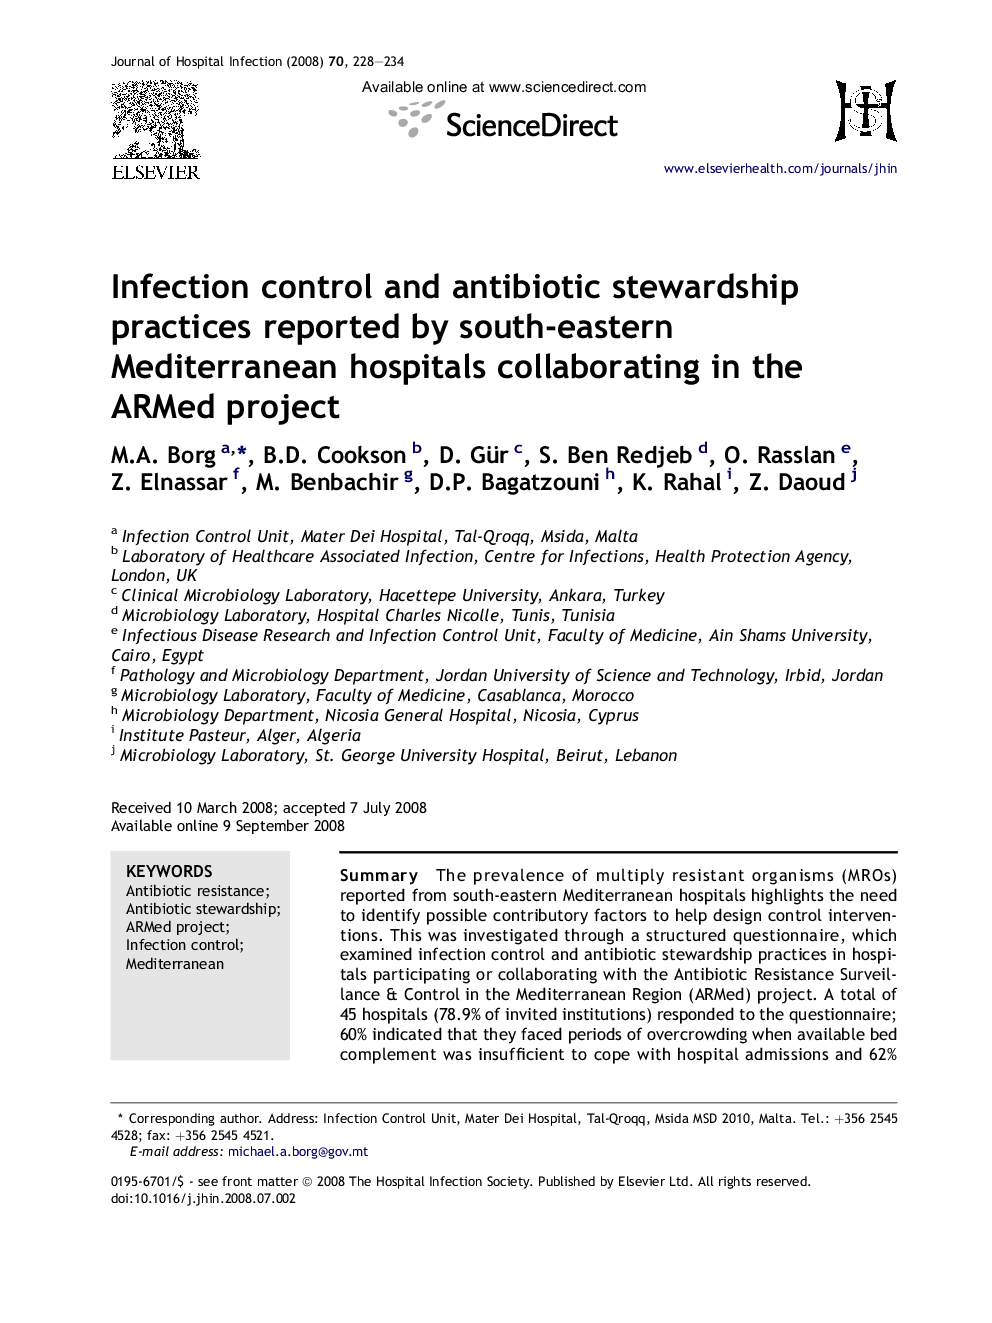 Infection control and antibiotic stewardship practices reported by south-eastern Mediterranean hospitals collaborating in the ARMed project